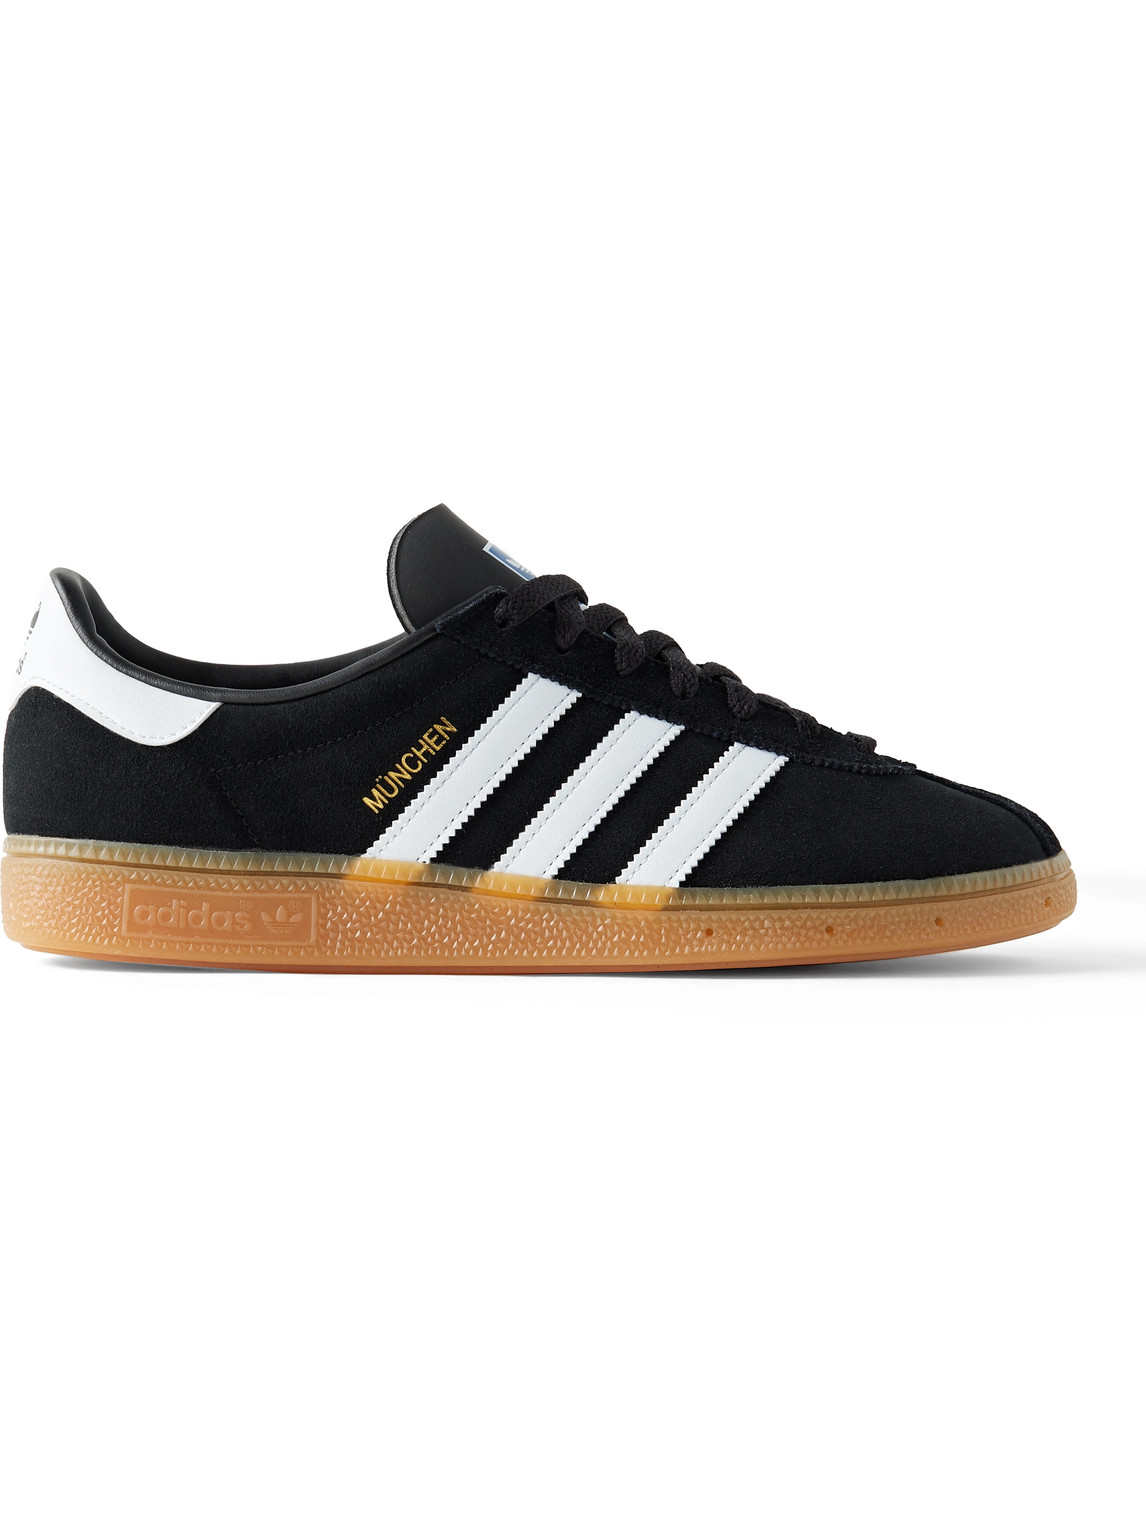 ADIDAS ORIGINALS MUNCHEN LEATHER-TRIMMED SUEDE SNEAKERS